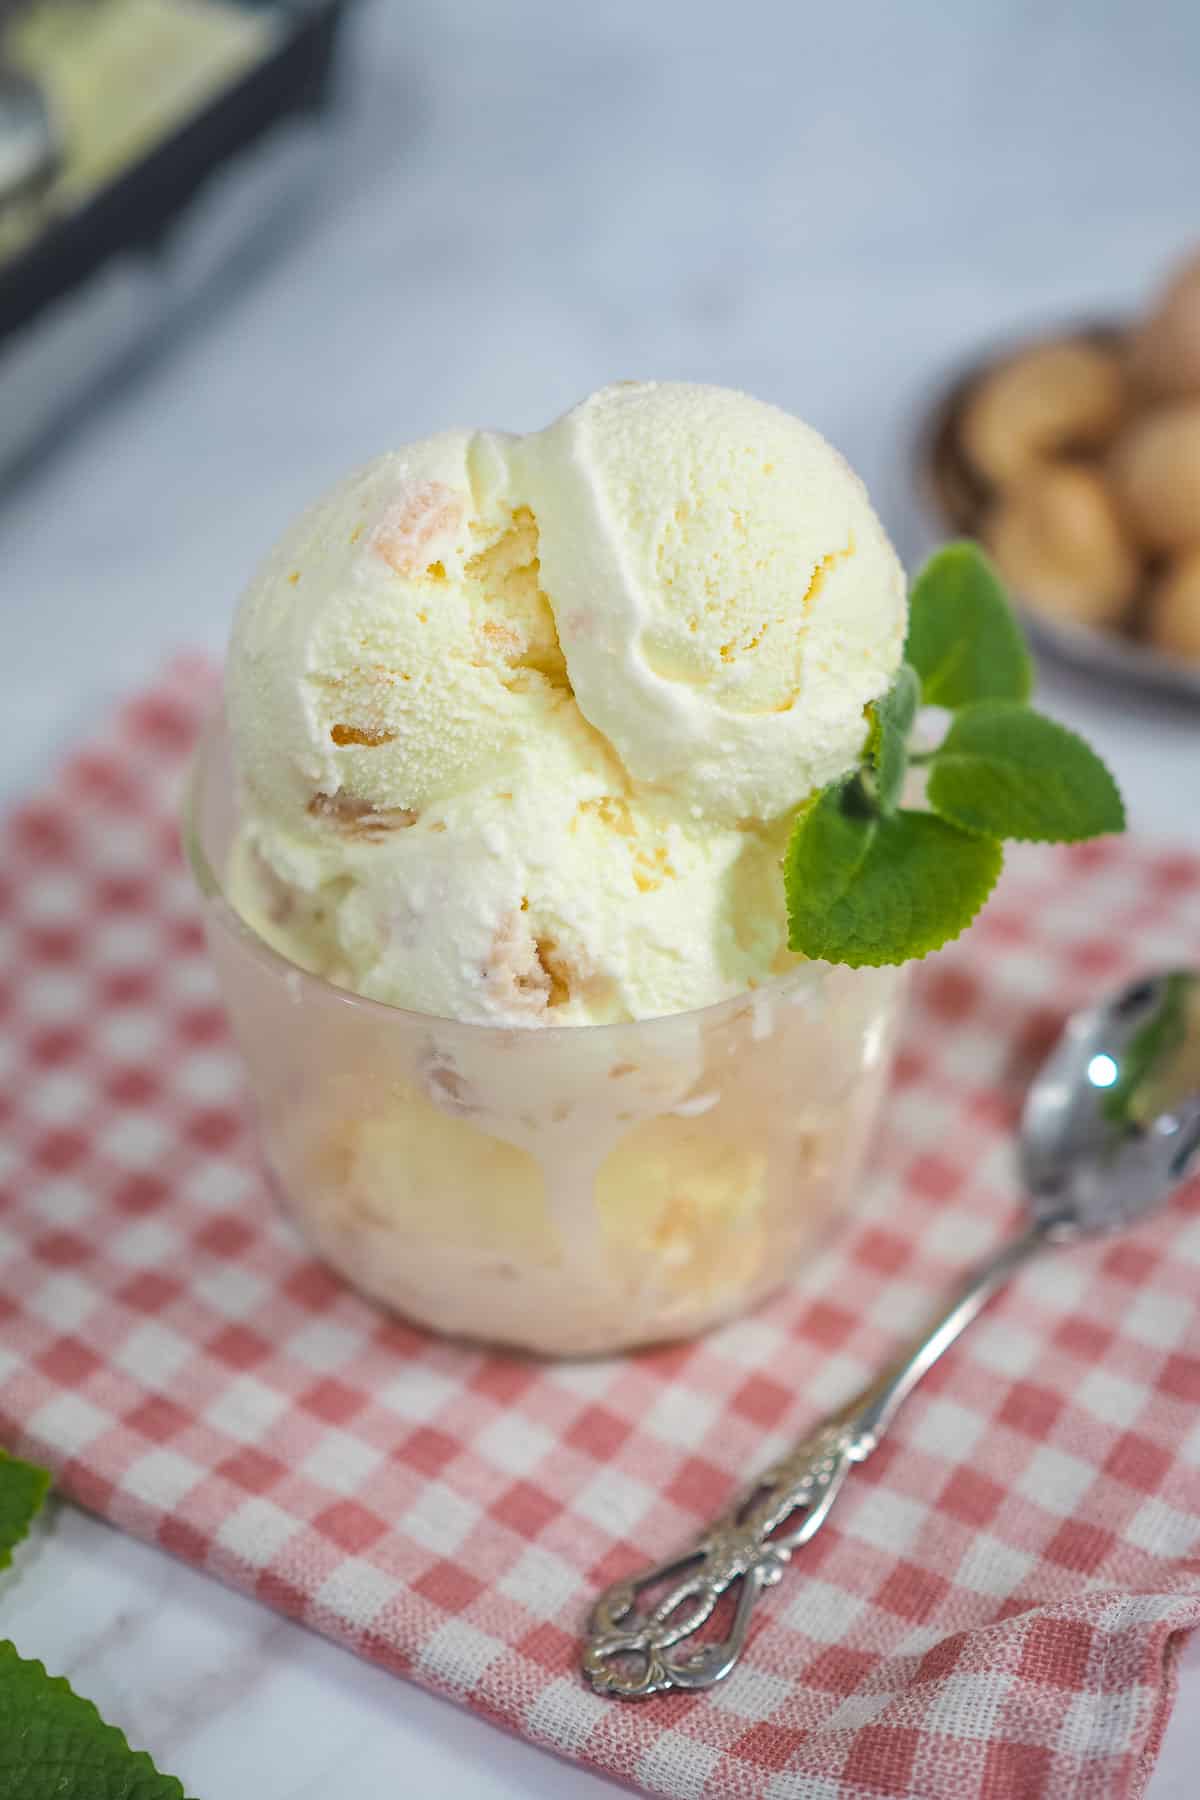 Ice cream scoops in a glass bowl and decorated with mint leaves.